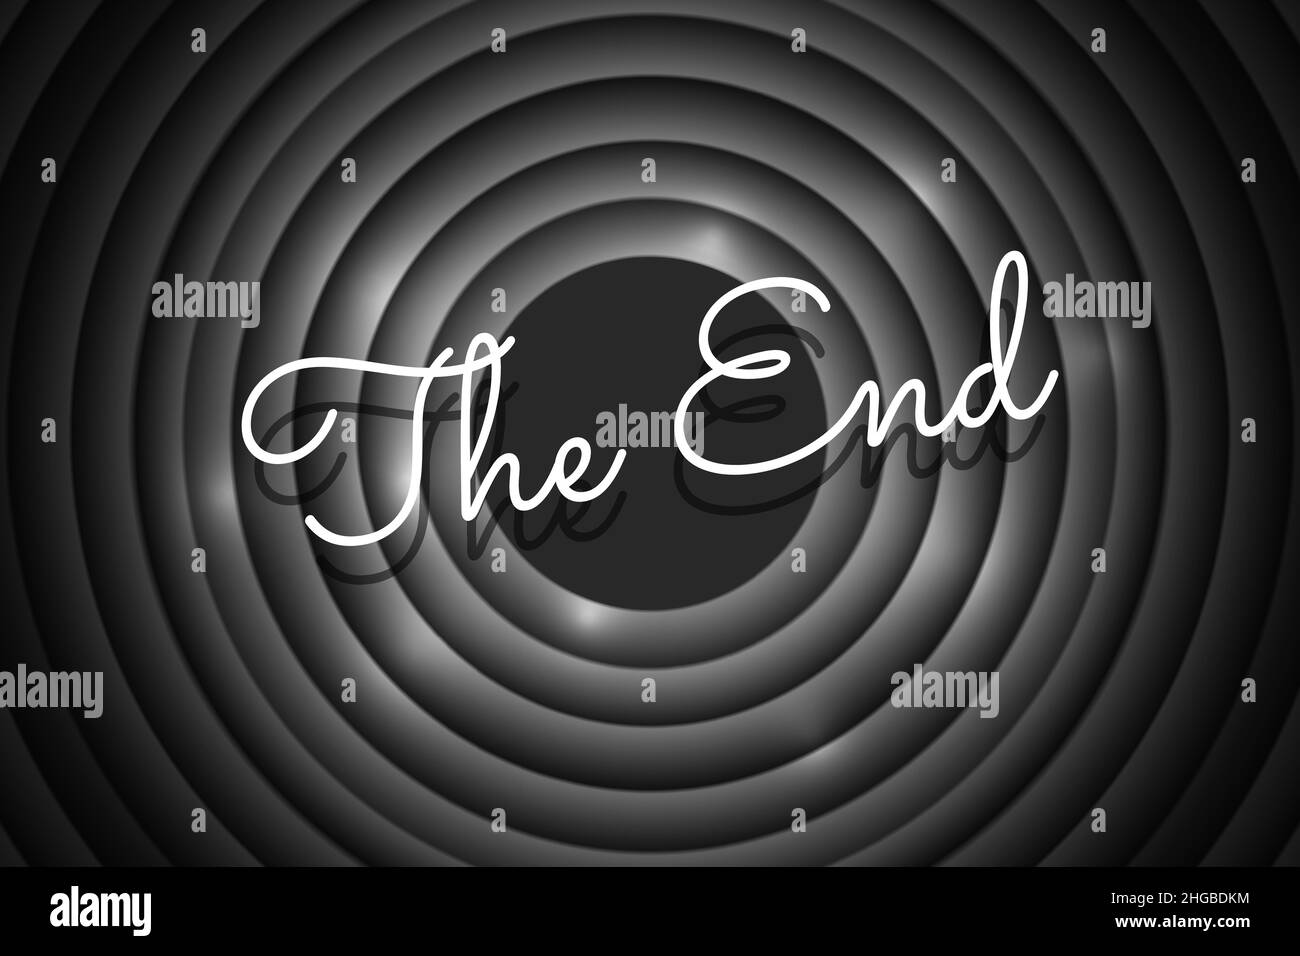 The End handwrite title on black and white round background. Old cinema movie circle ending screen. Vector noir promotion poster design template eps illustration Stock Vector